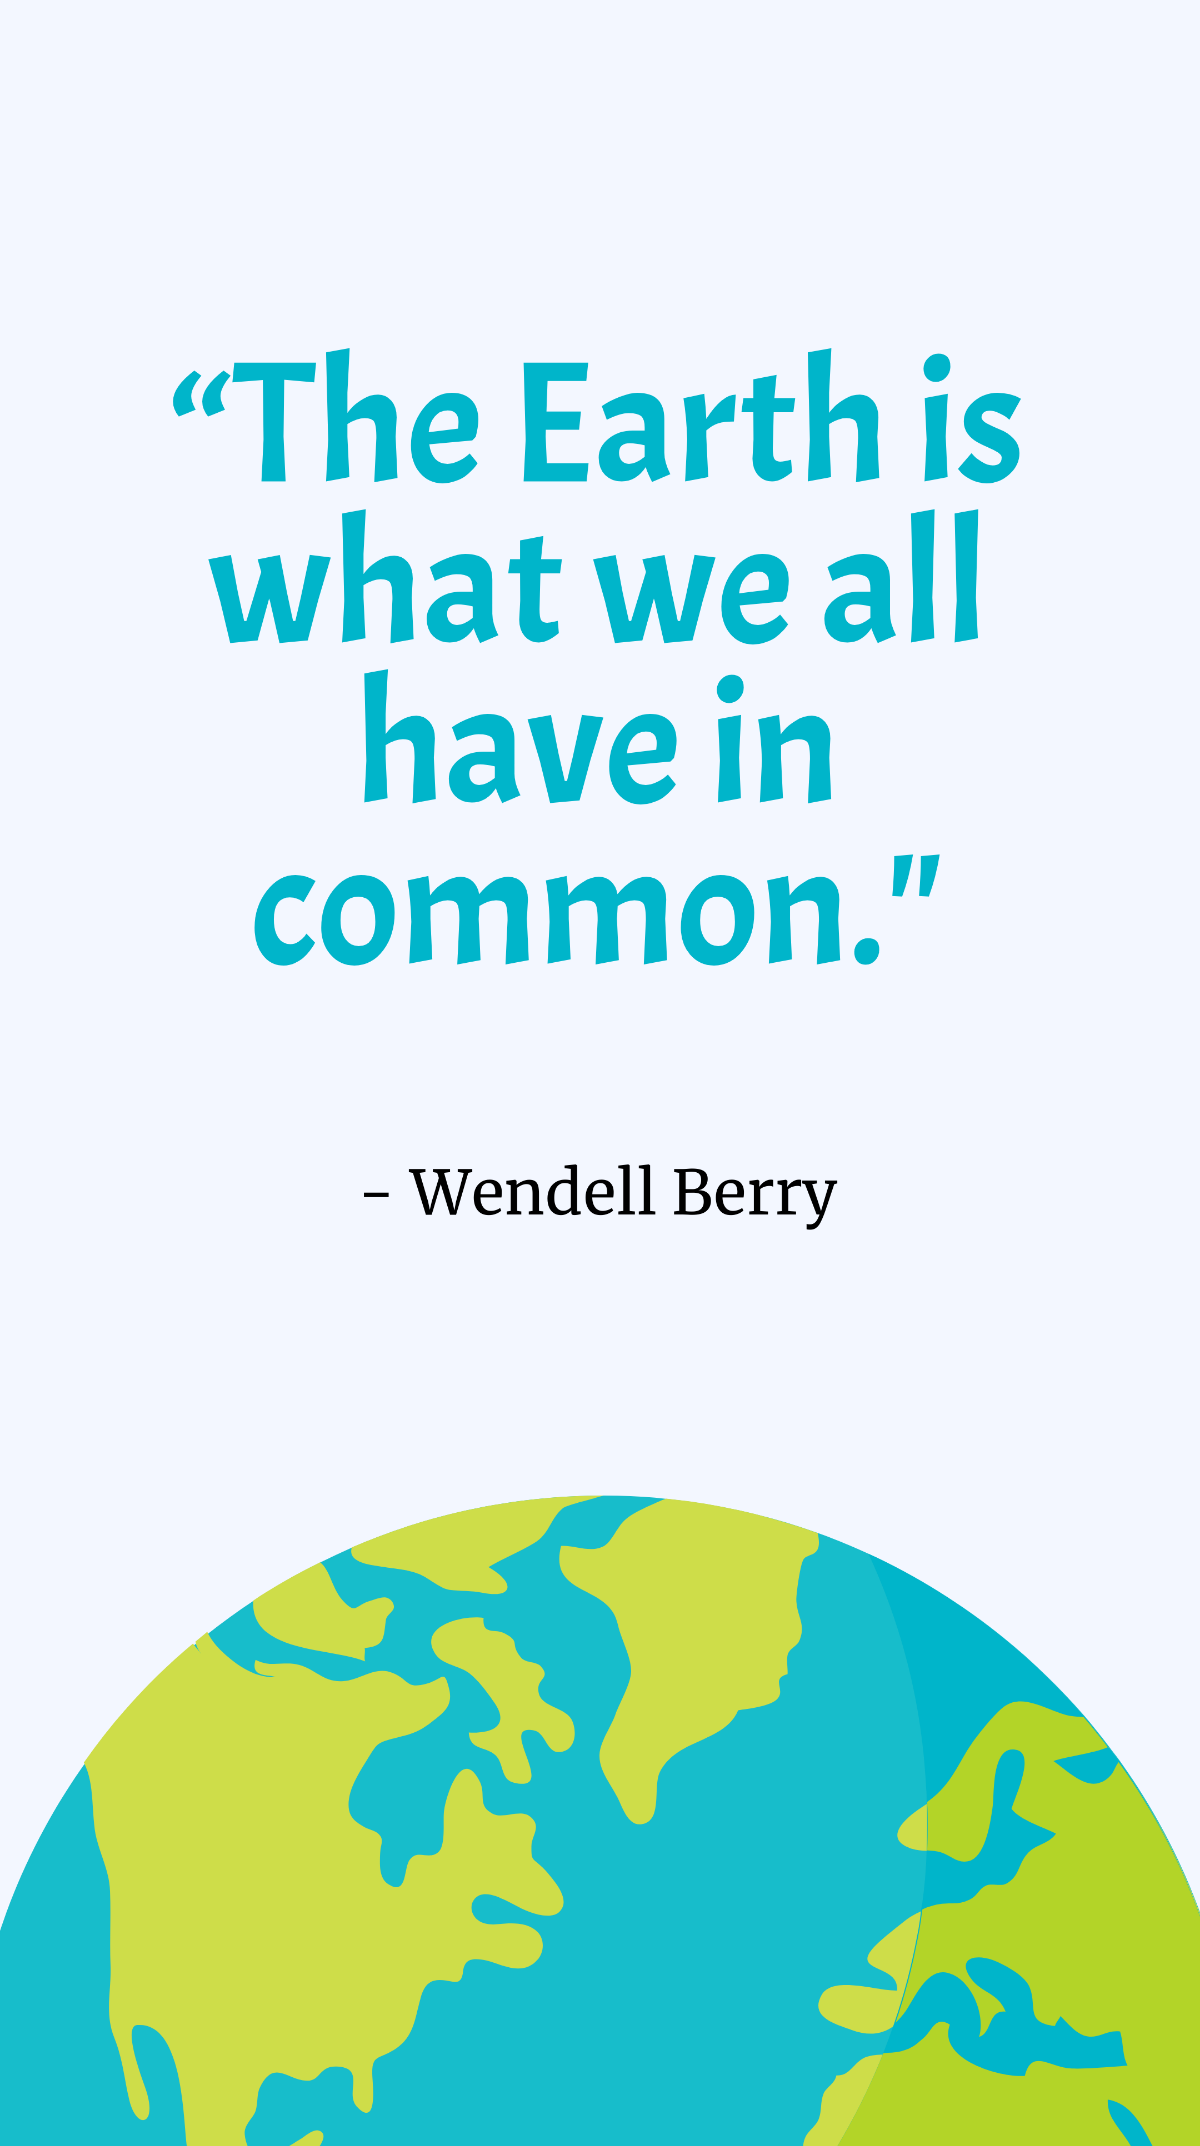 Wendell Berry - “The Earth is what we all have in common."